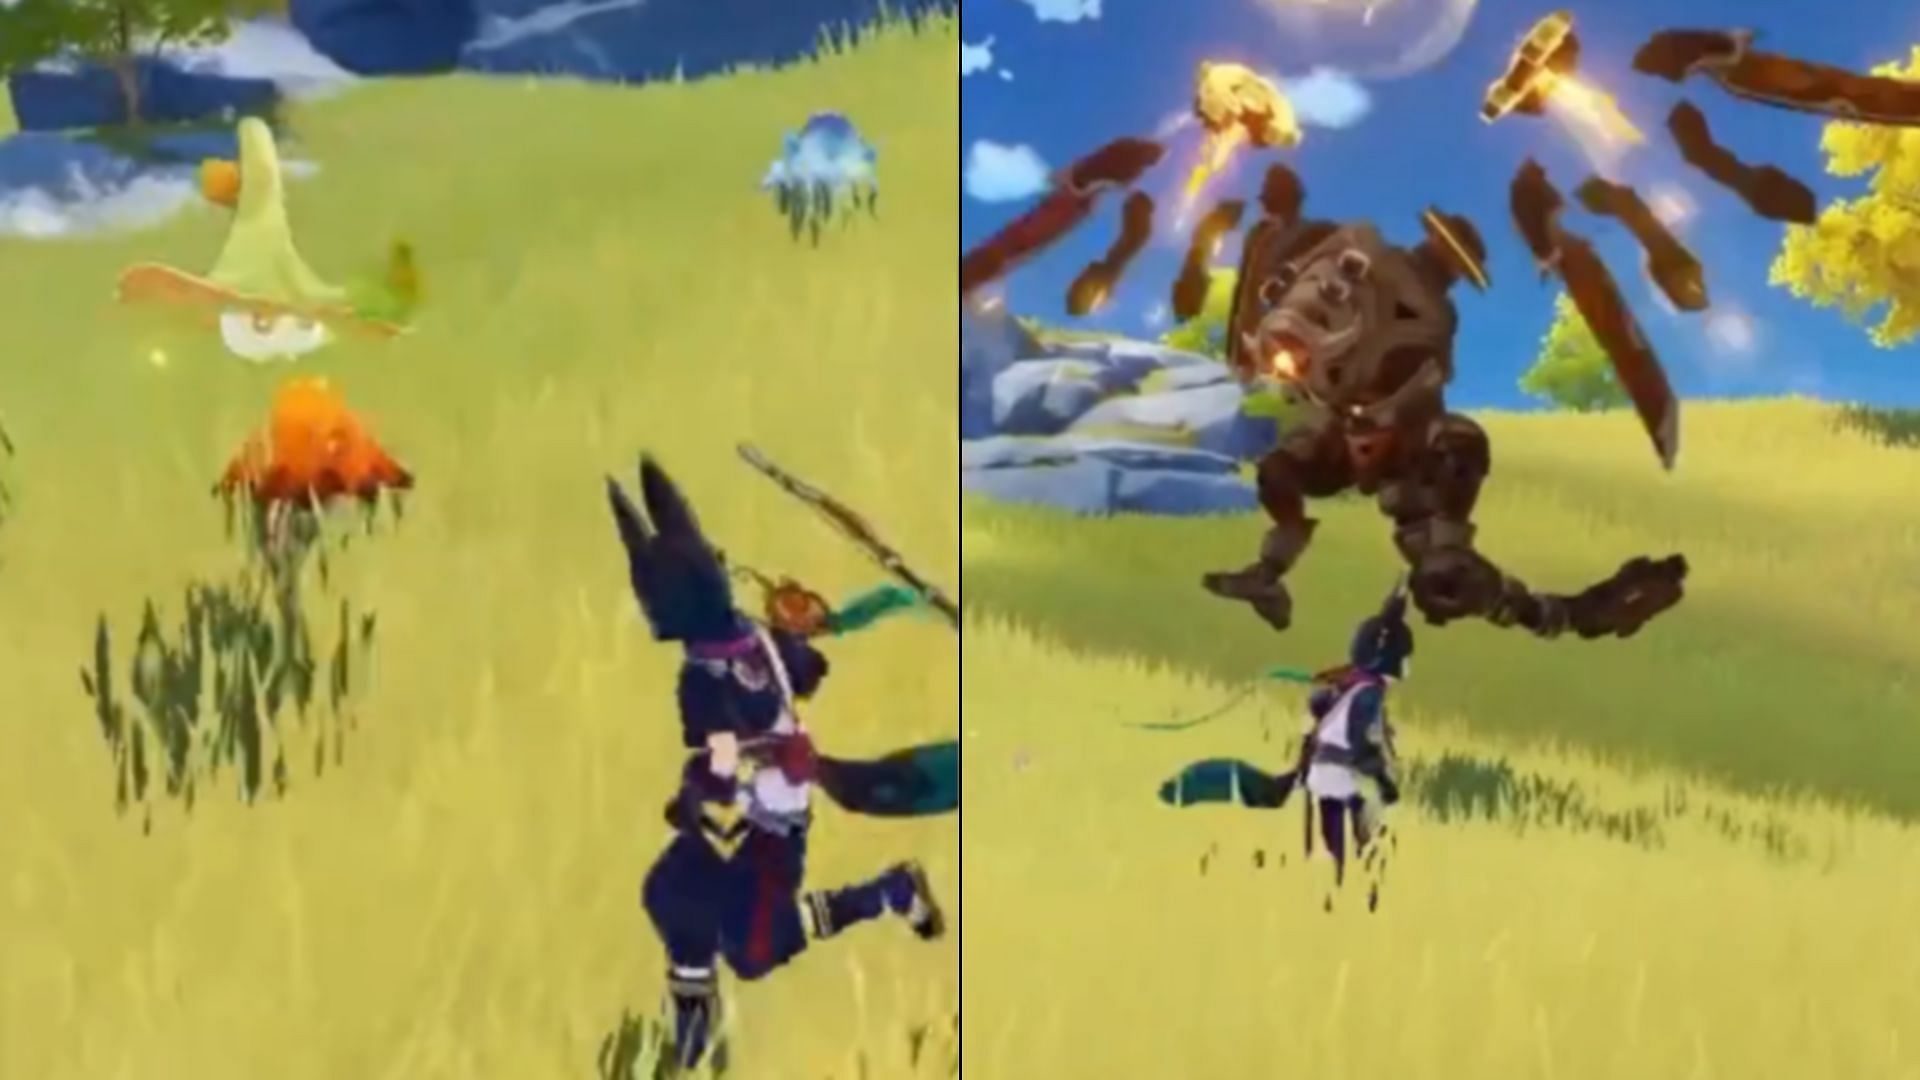 Genshin Impact vs. Breath Of The Wild: Which Is Better?